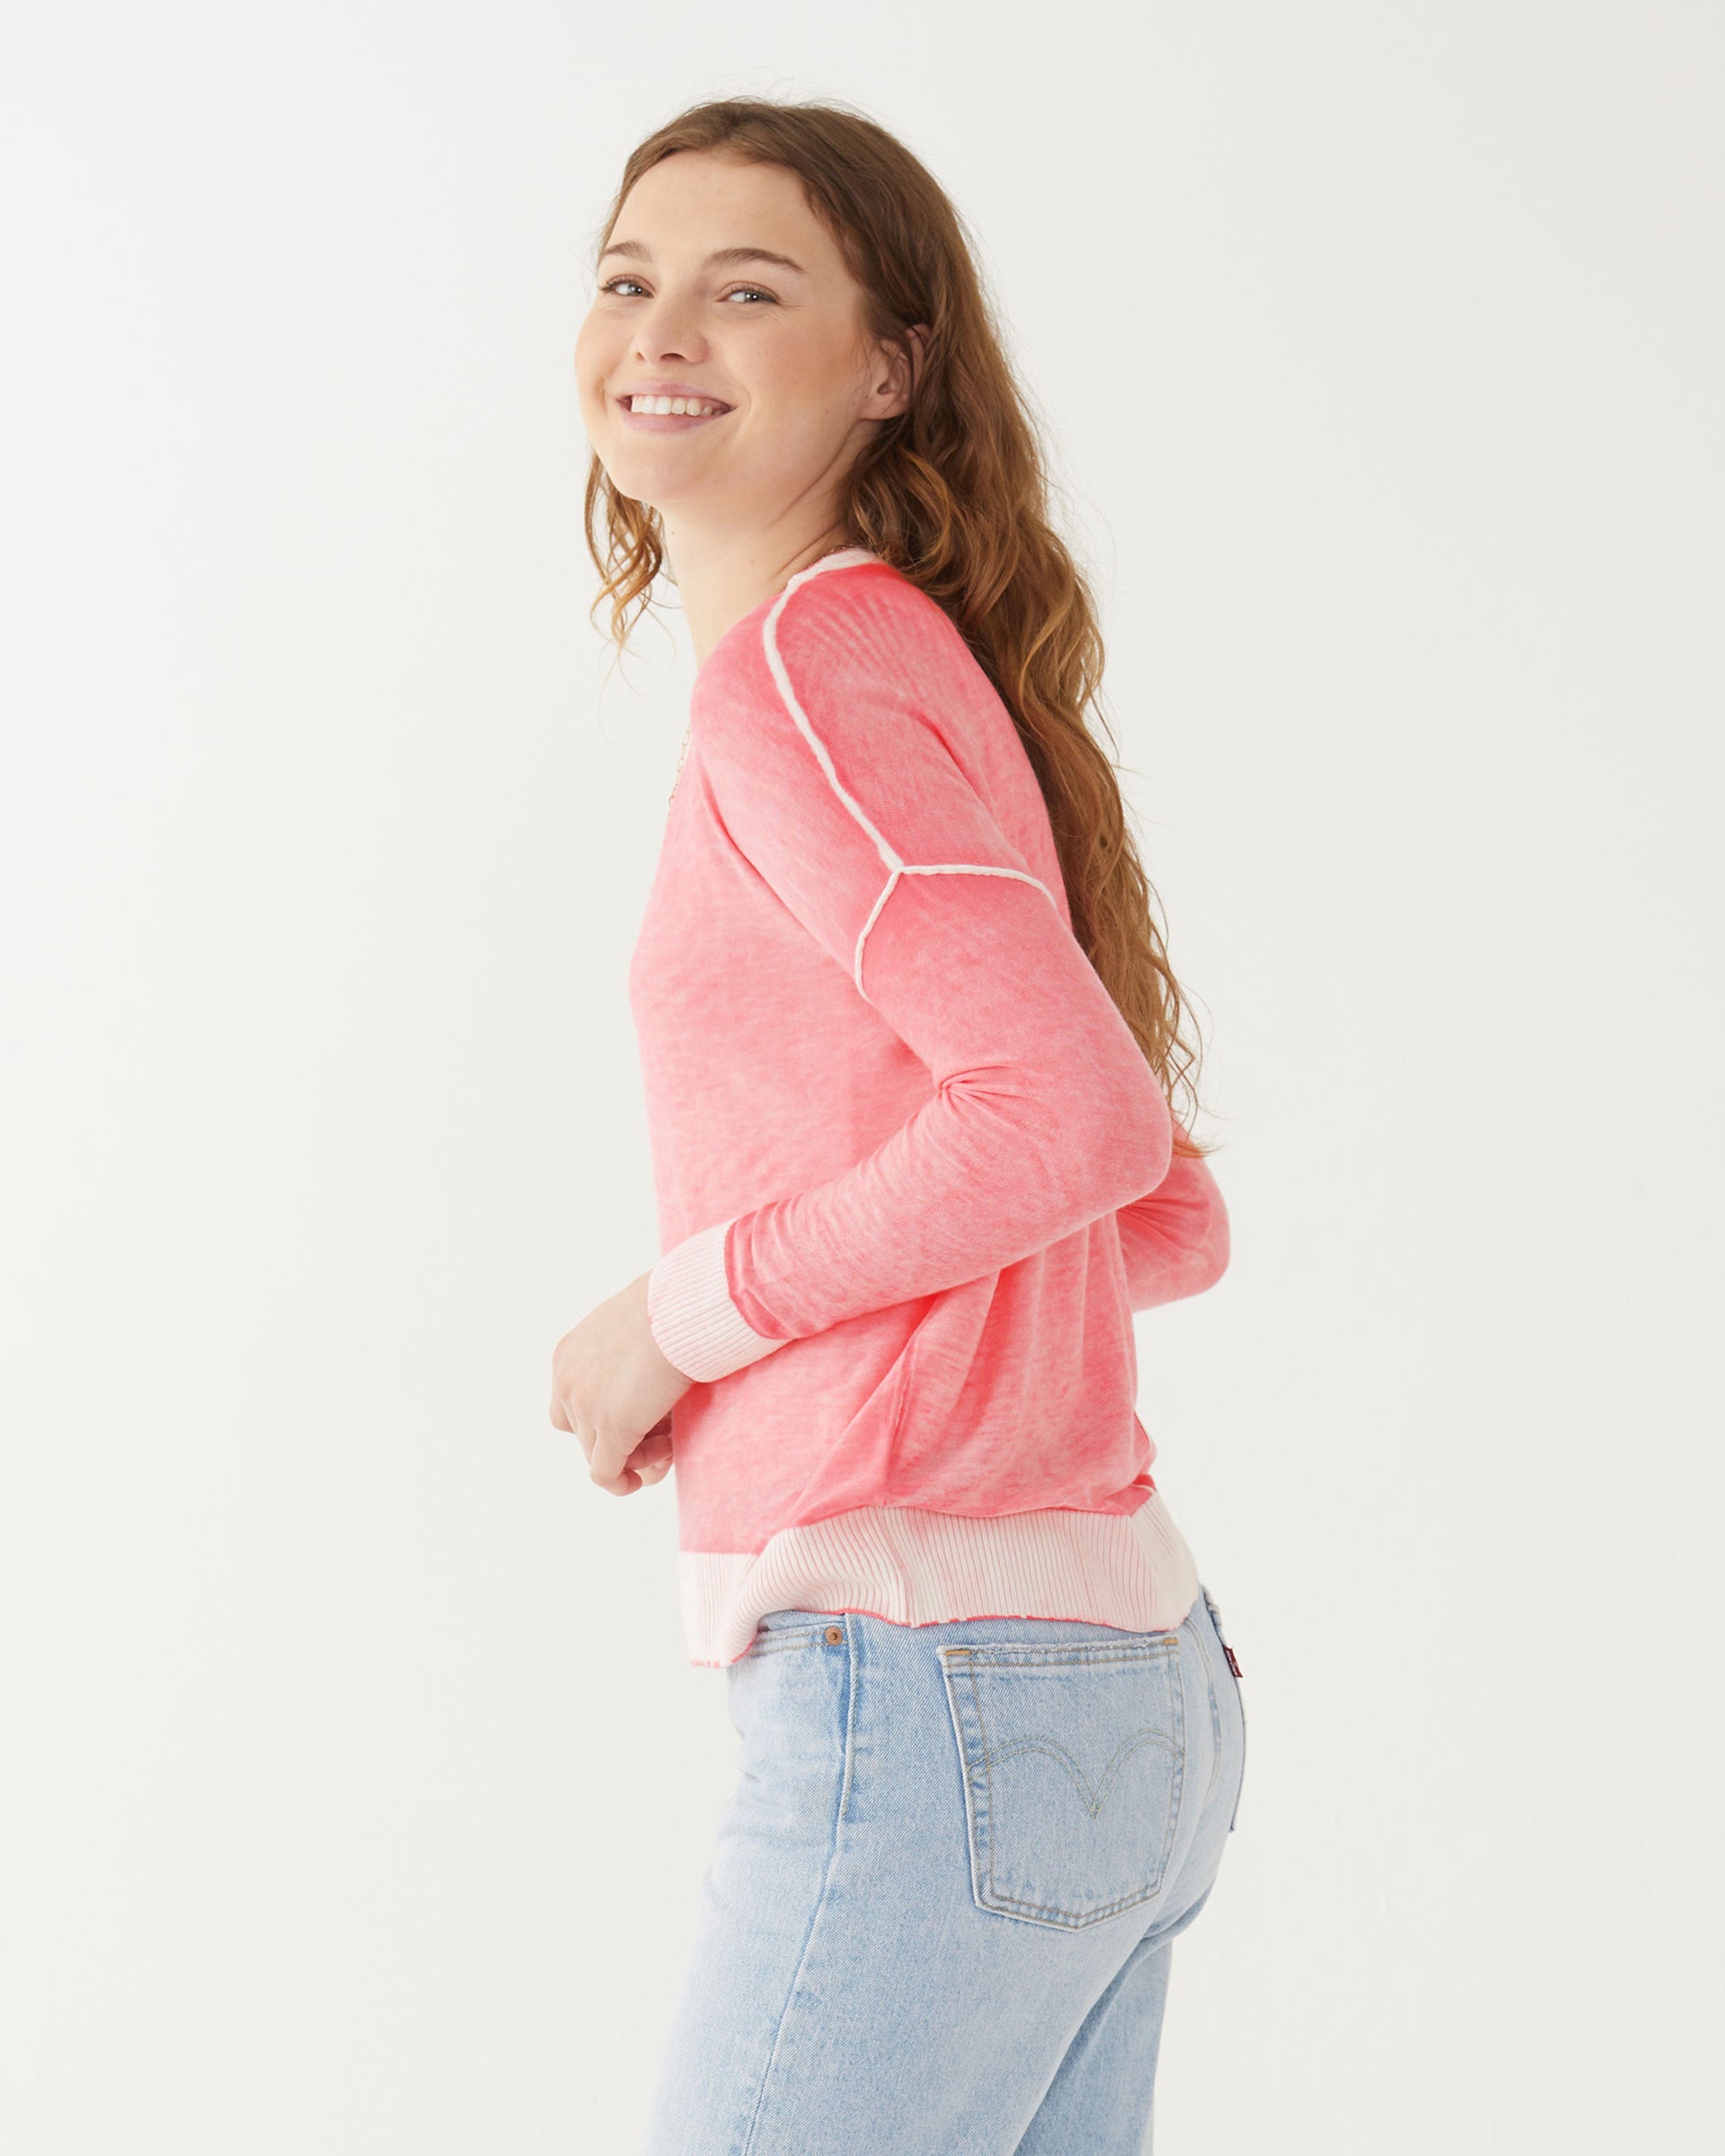 female wearing pink hand-dyed cashmere sweater sideways on a white background